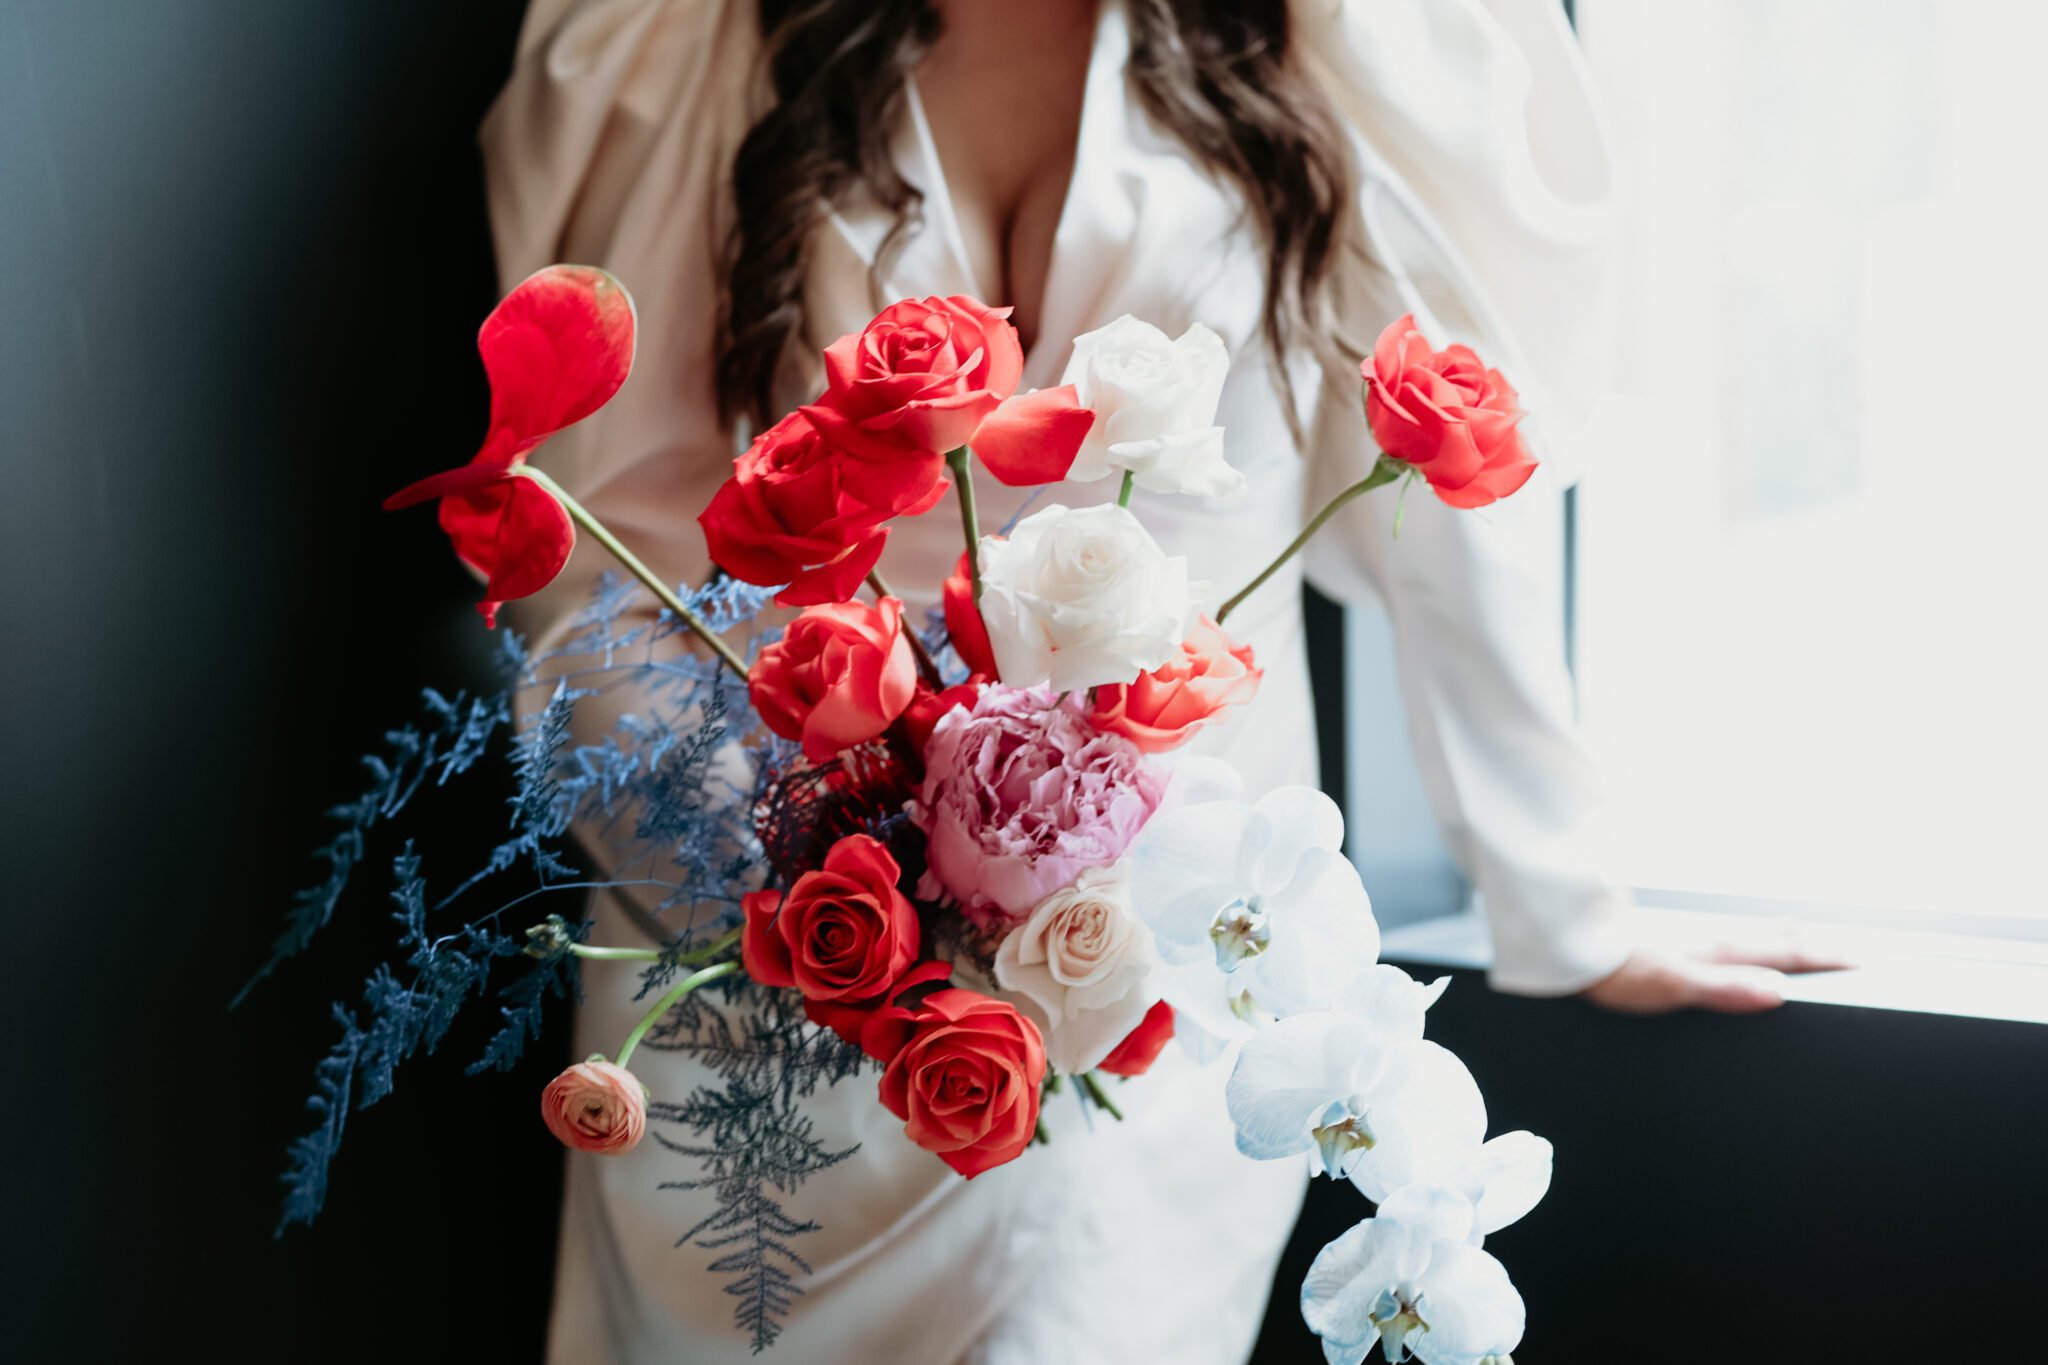 Chic stylish bride holding bold florals by The Series By Court, blending modern and retro styles with eye-catching accents.